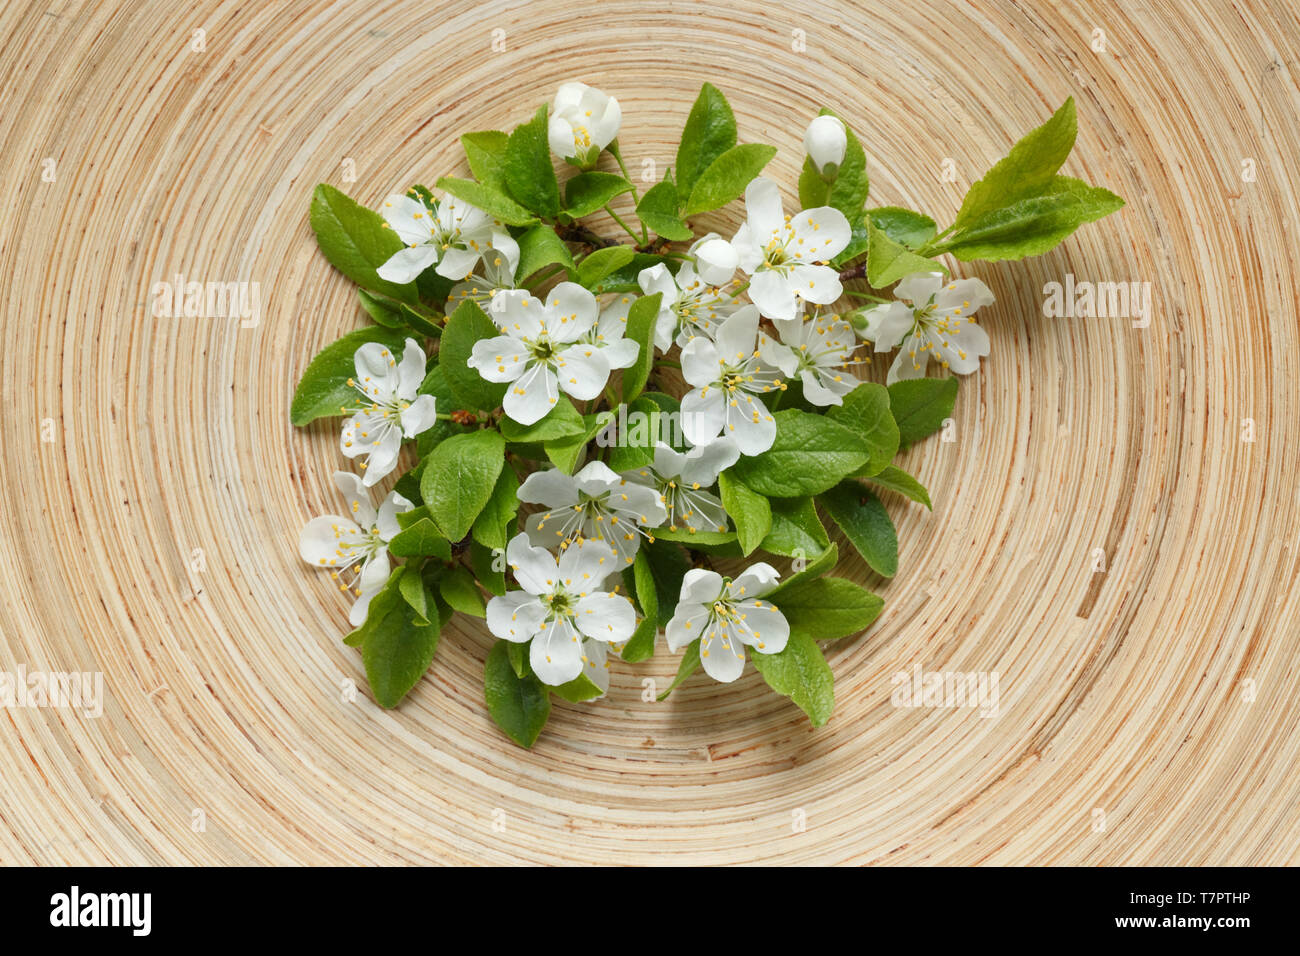 High angle view of plum flowers on wooden plate Stock Photo